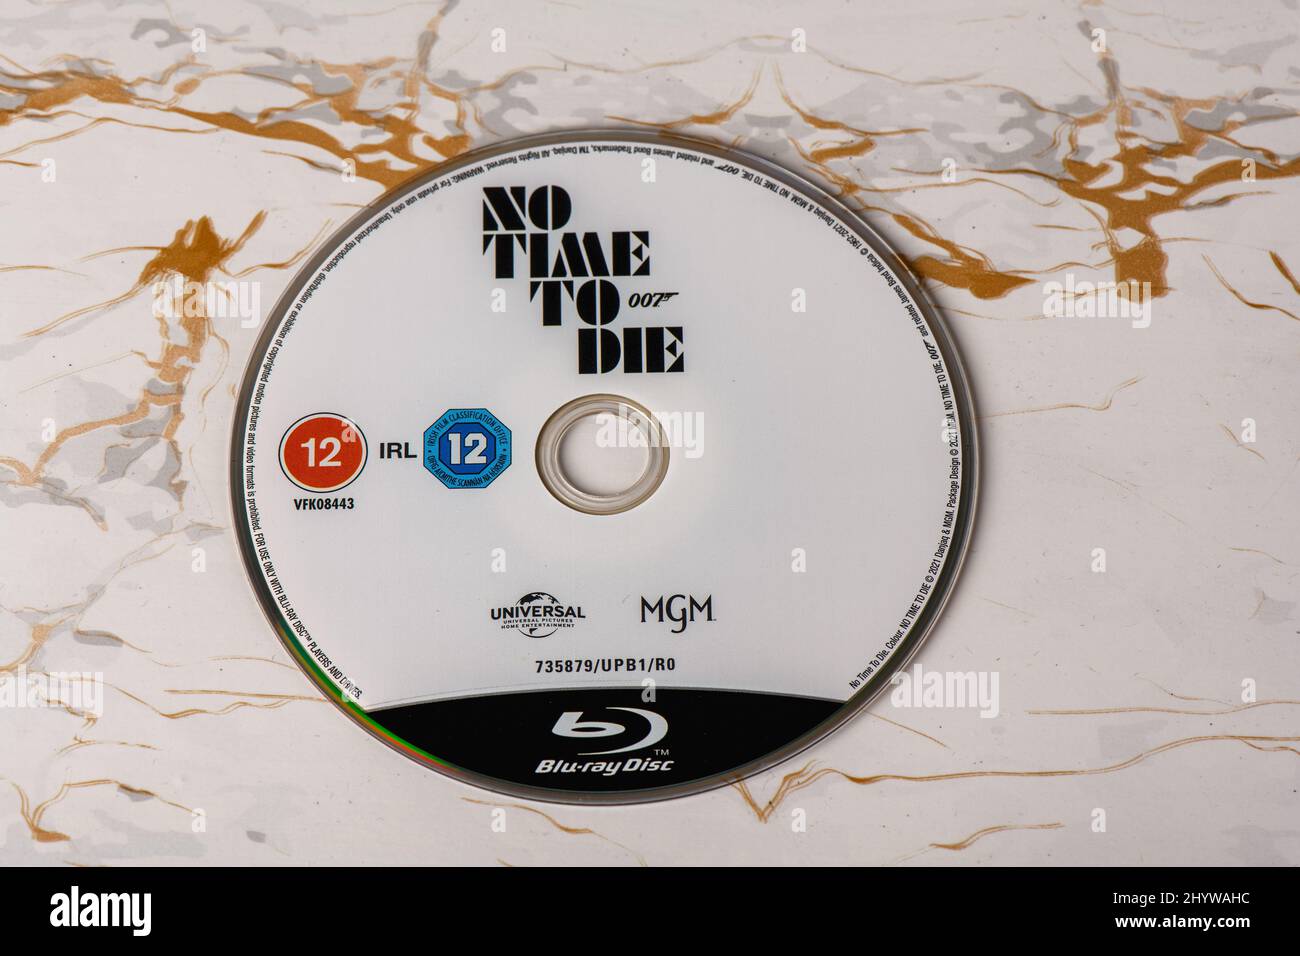 Blu ray disc of the James bond 007 film 'No Time to die' Stock Photo